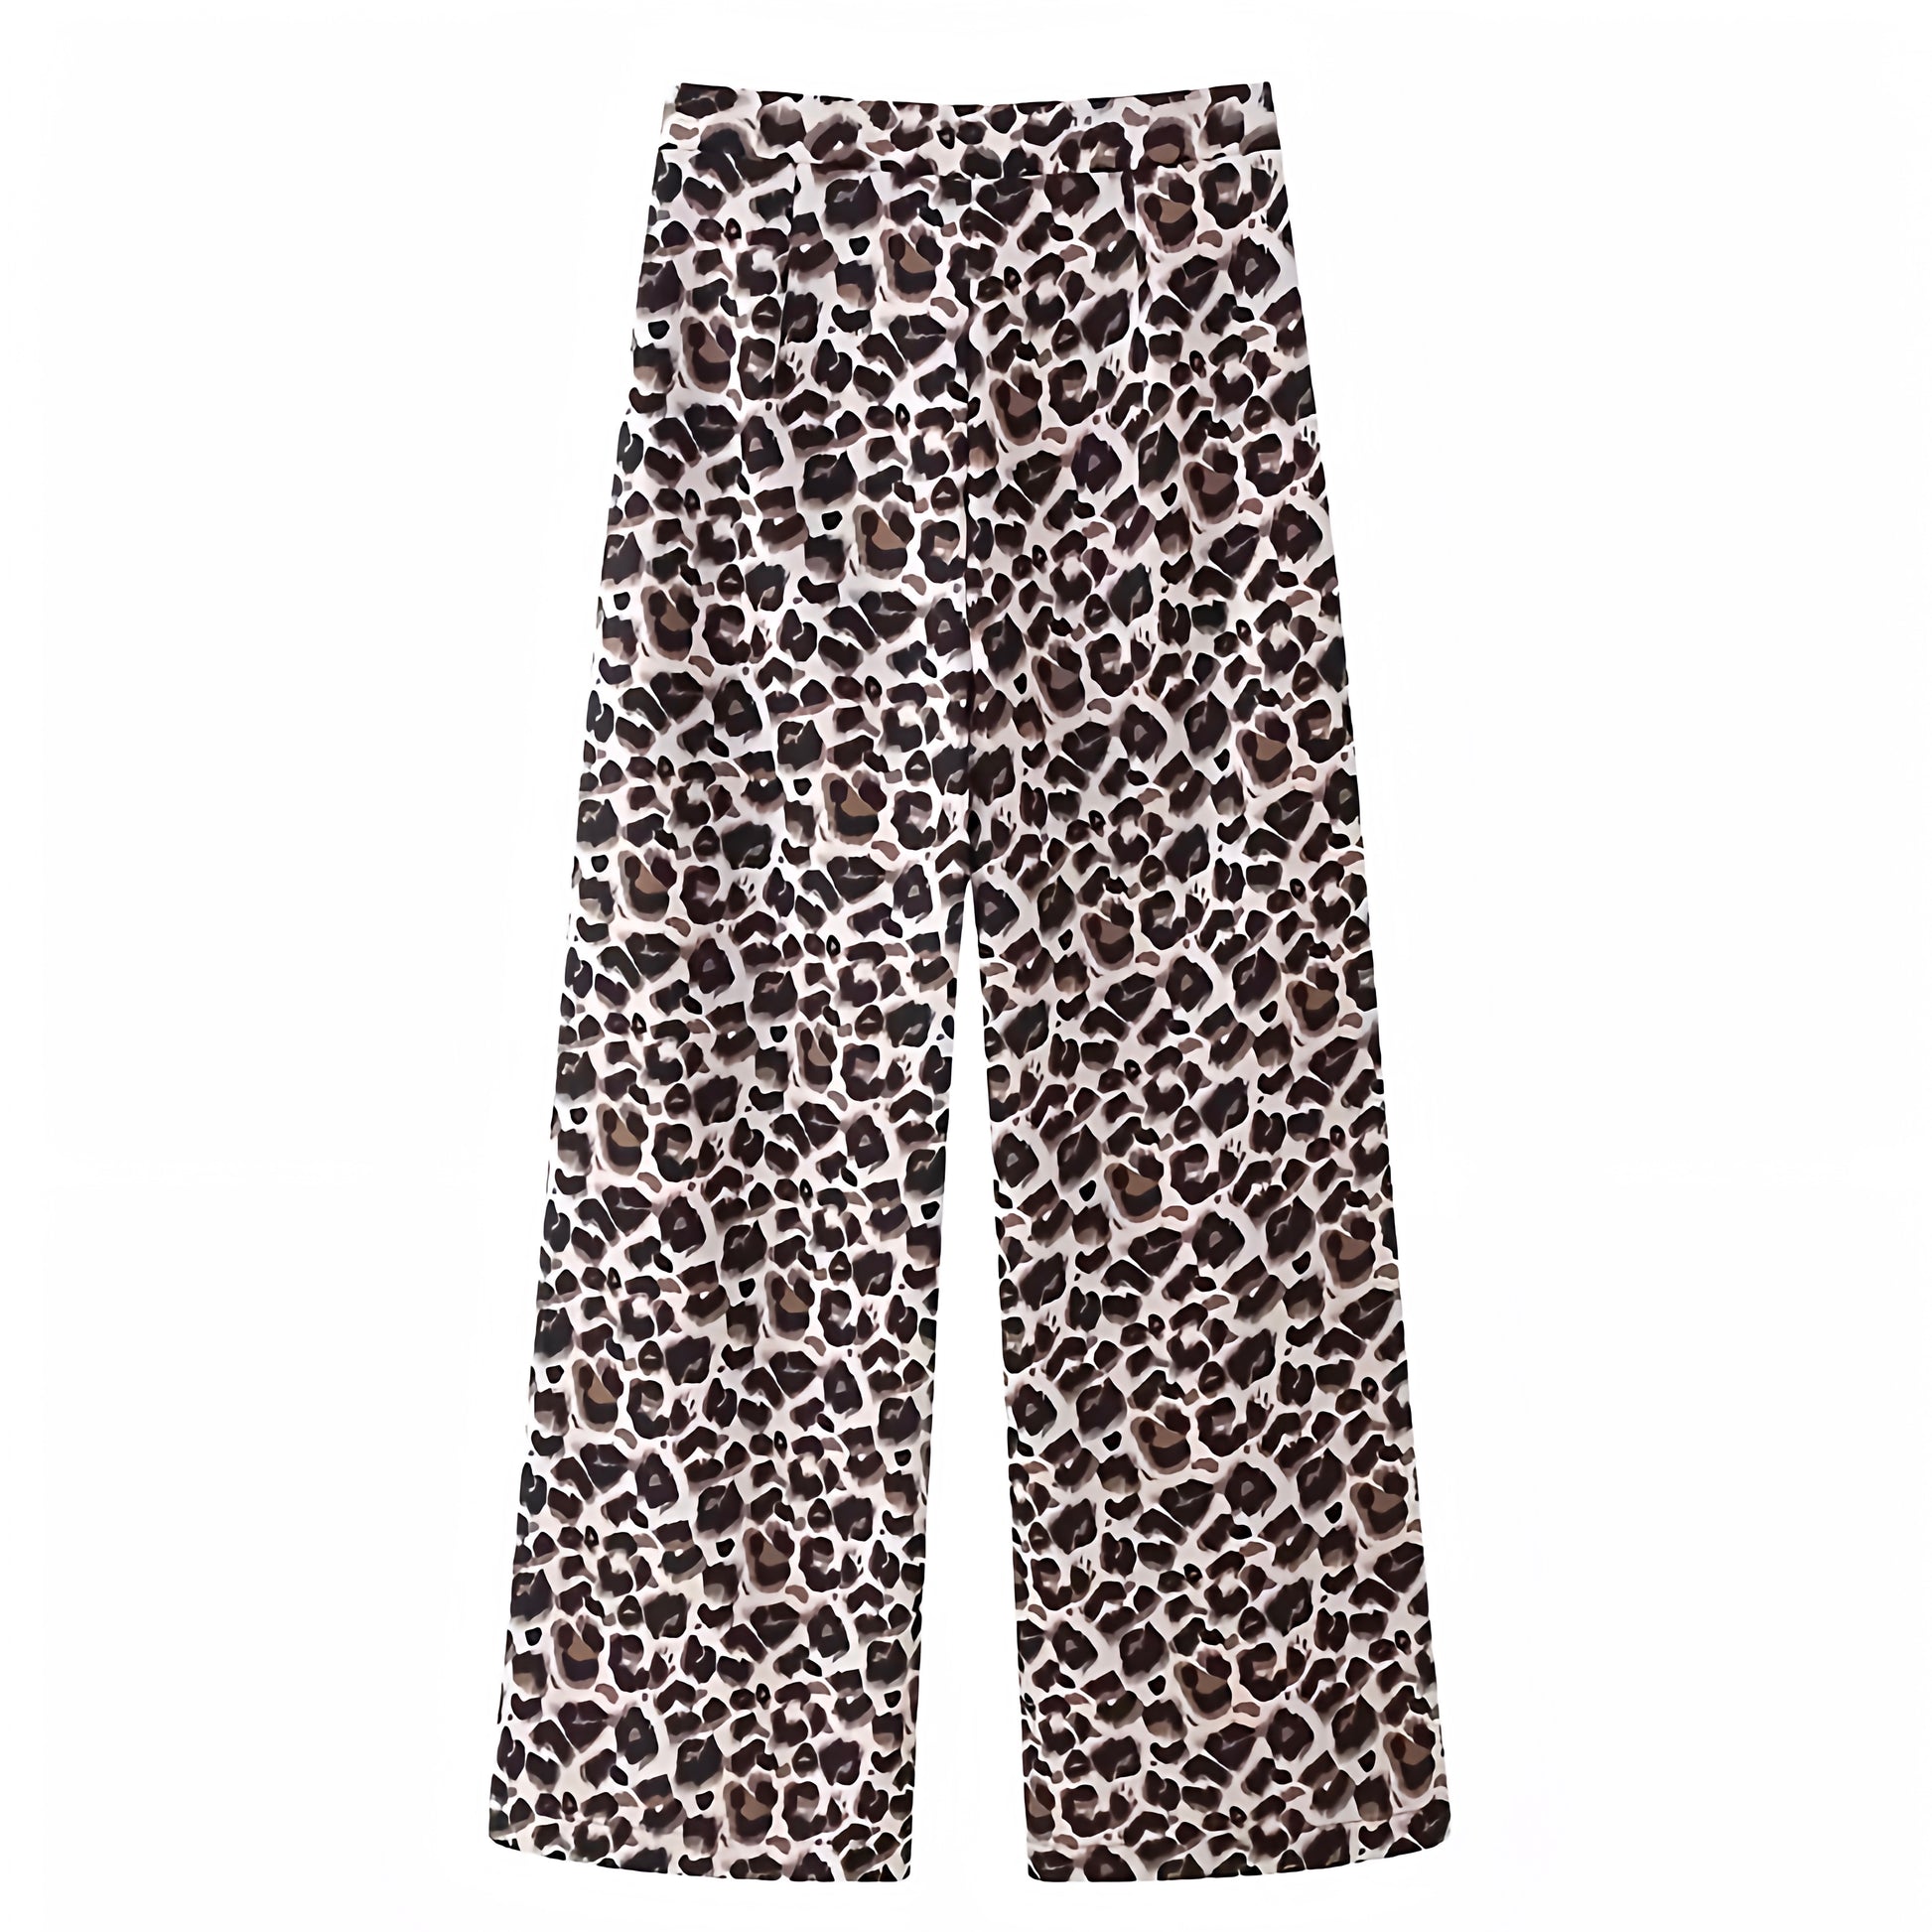 leopard-cheetah-animal-print-patterned-brown-black-white-vintage-pleated-mid-high-rise-waist-wide-stright-leg-vintage-trouser-pants-with-pockets-women-ladies-chic-trendy-spring-2024-summer-elegant-casual-feminine-party-date-night-out-sexy-club-wear-y2k-style-zara-revolve-aritzia-white-fox-princess-polly-babyboo-iamgia-edikted